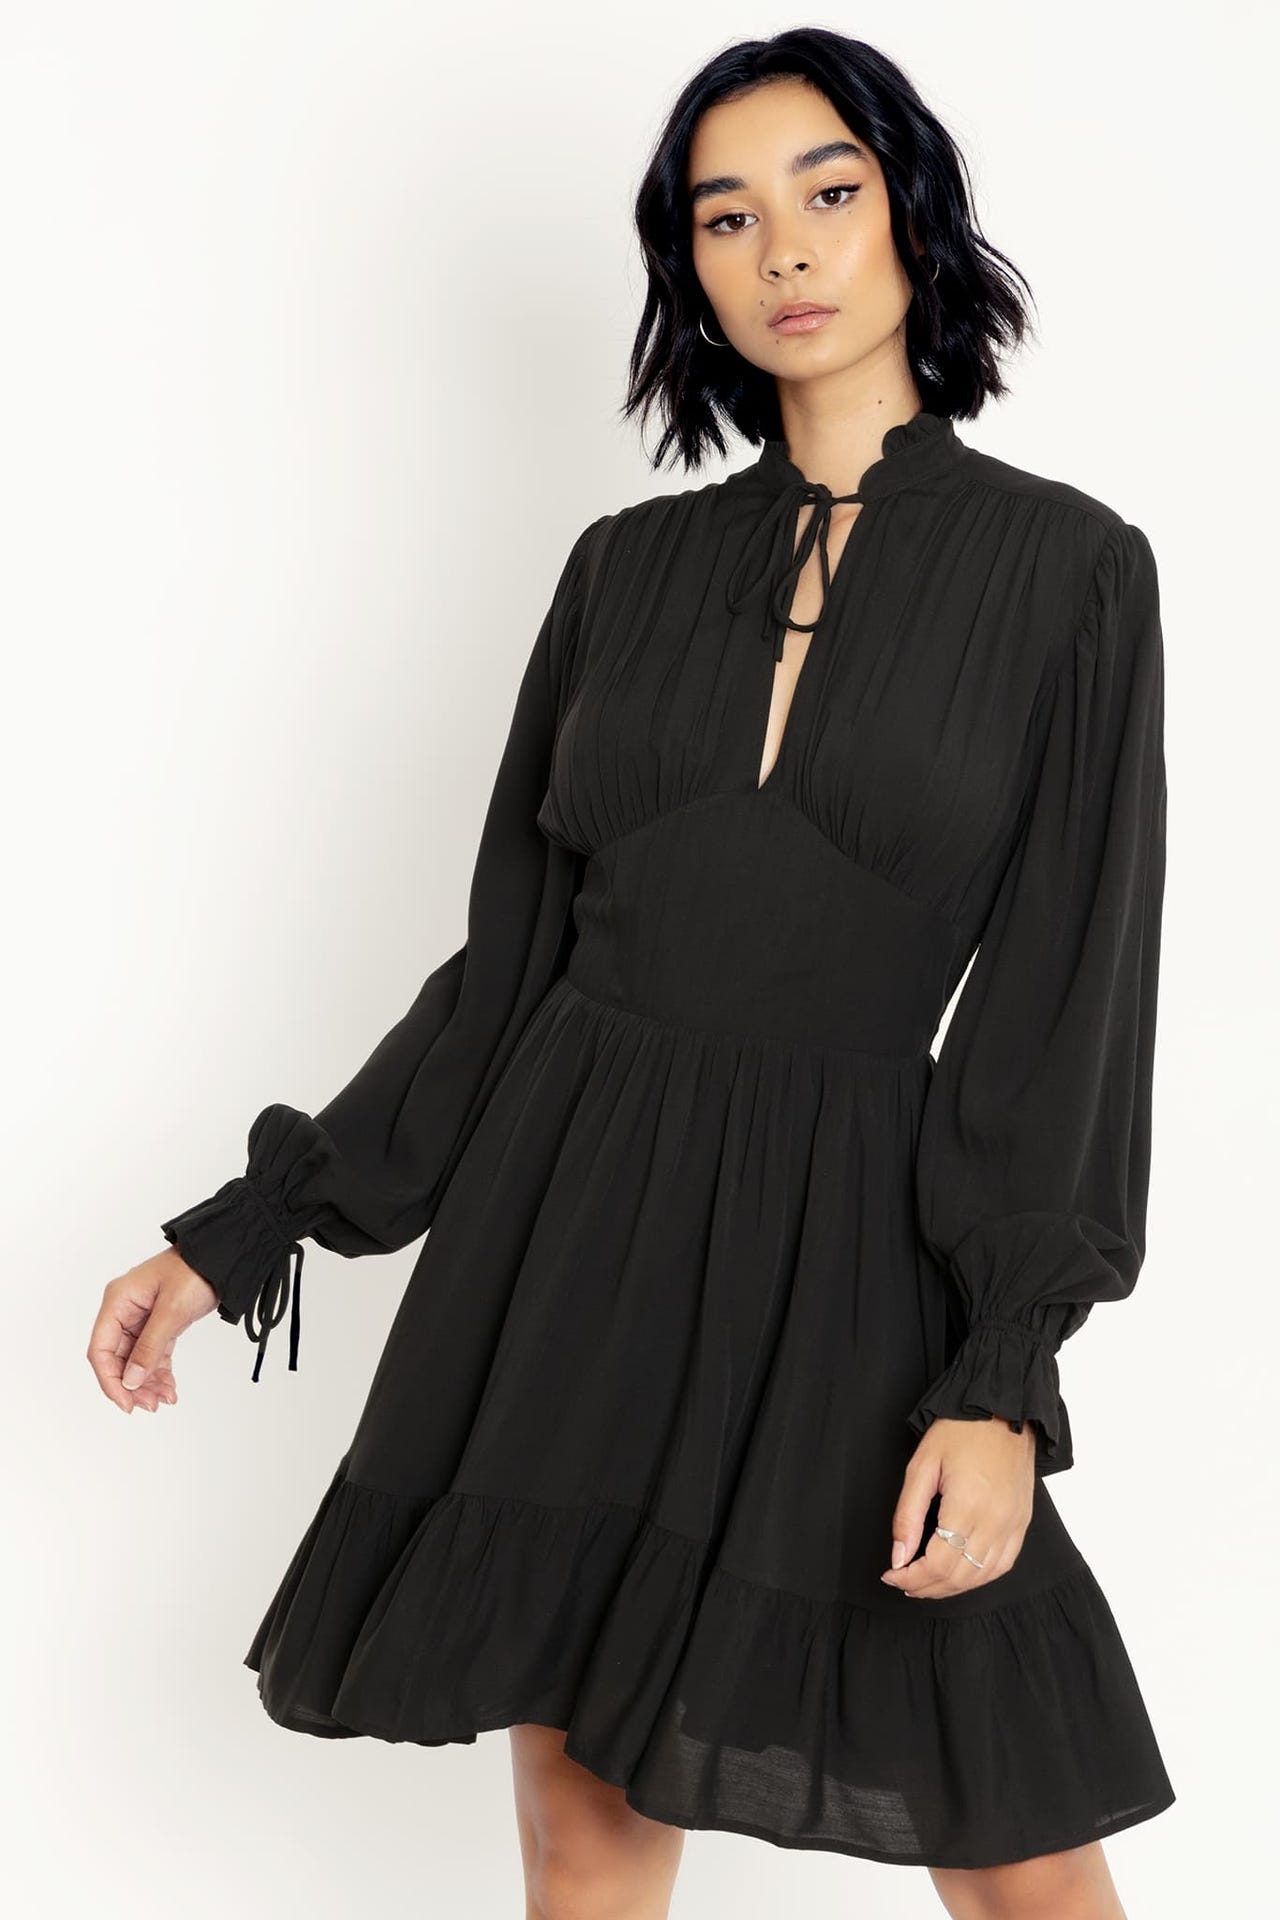 Good Witch Dress - Limited